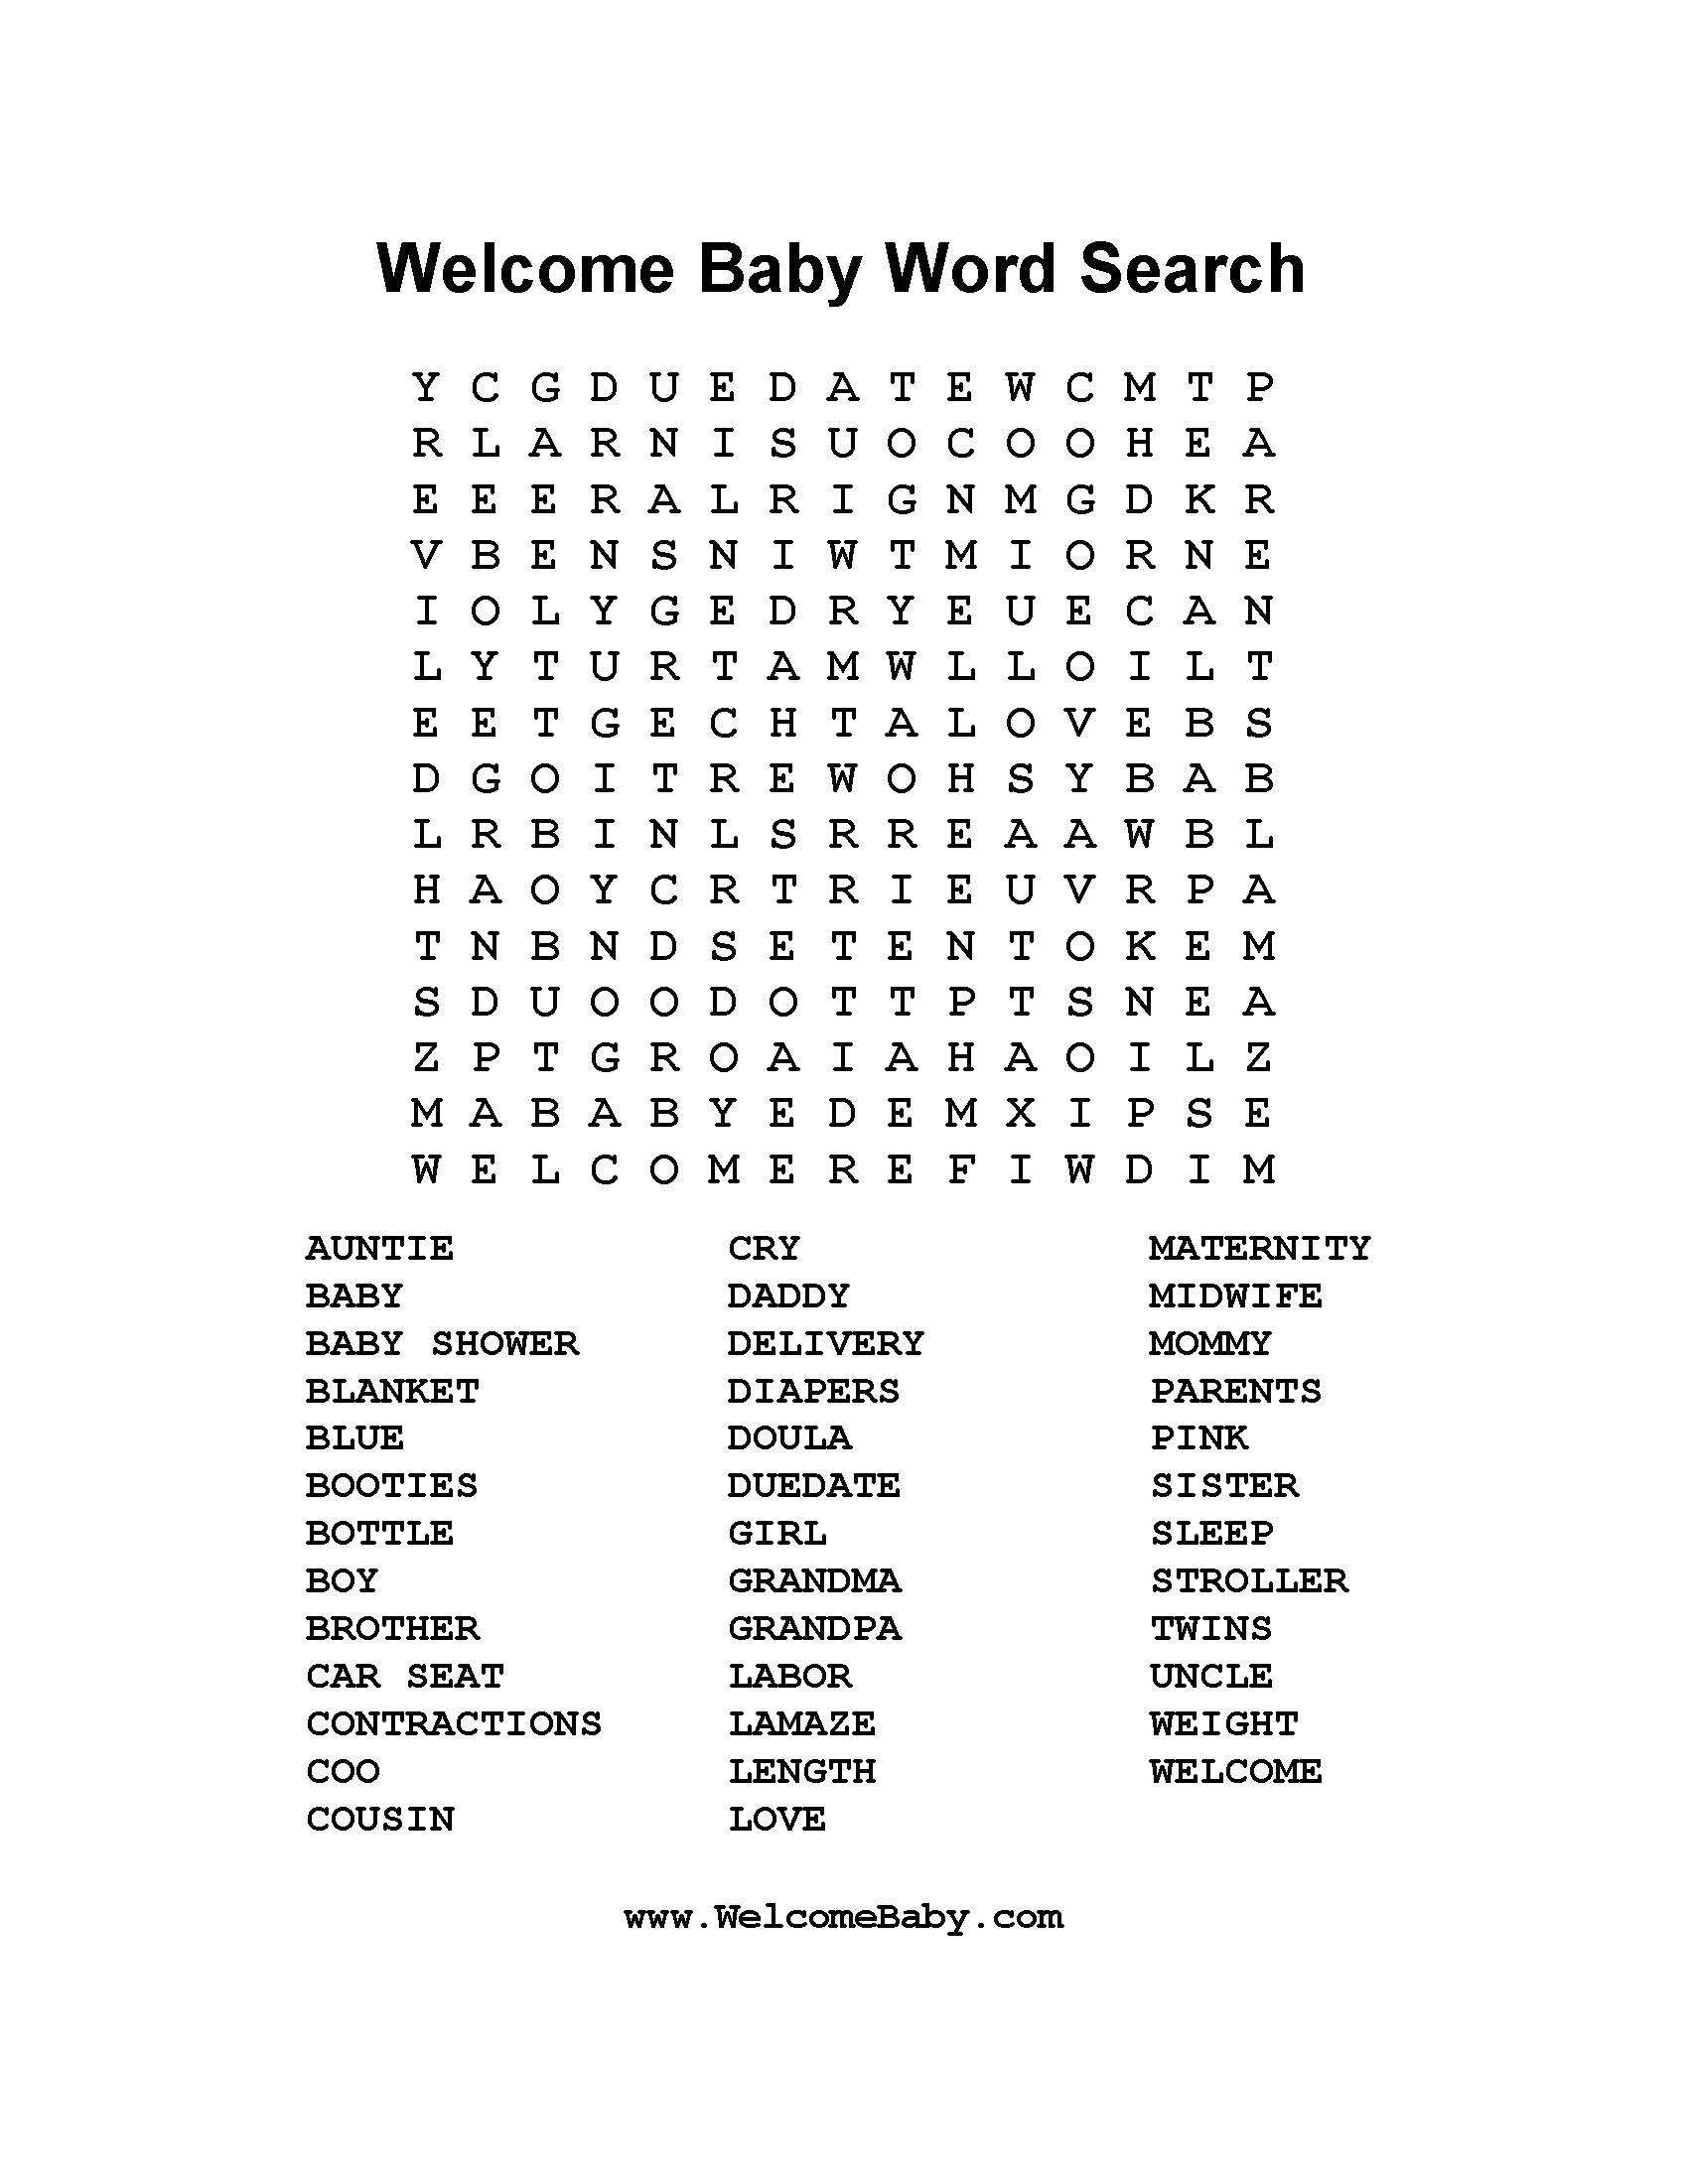 Baby Shower Welcome Scramble Games And Answers Nursery Rhyme - Printable Crossword Puzzles For Baby Shower